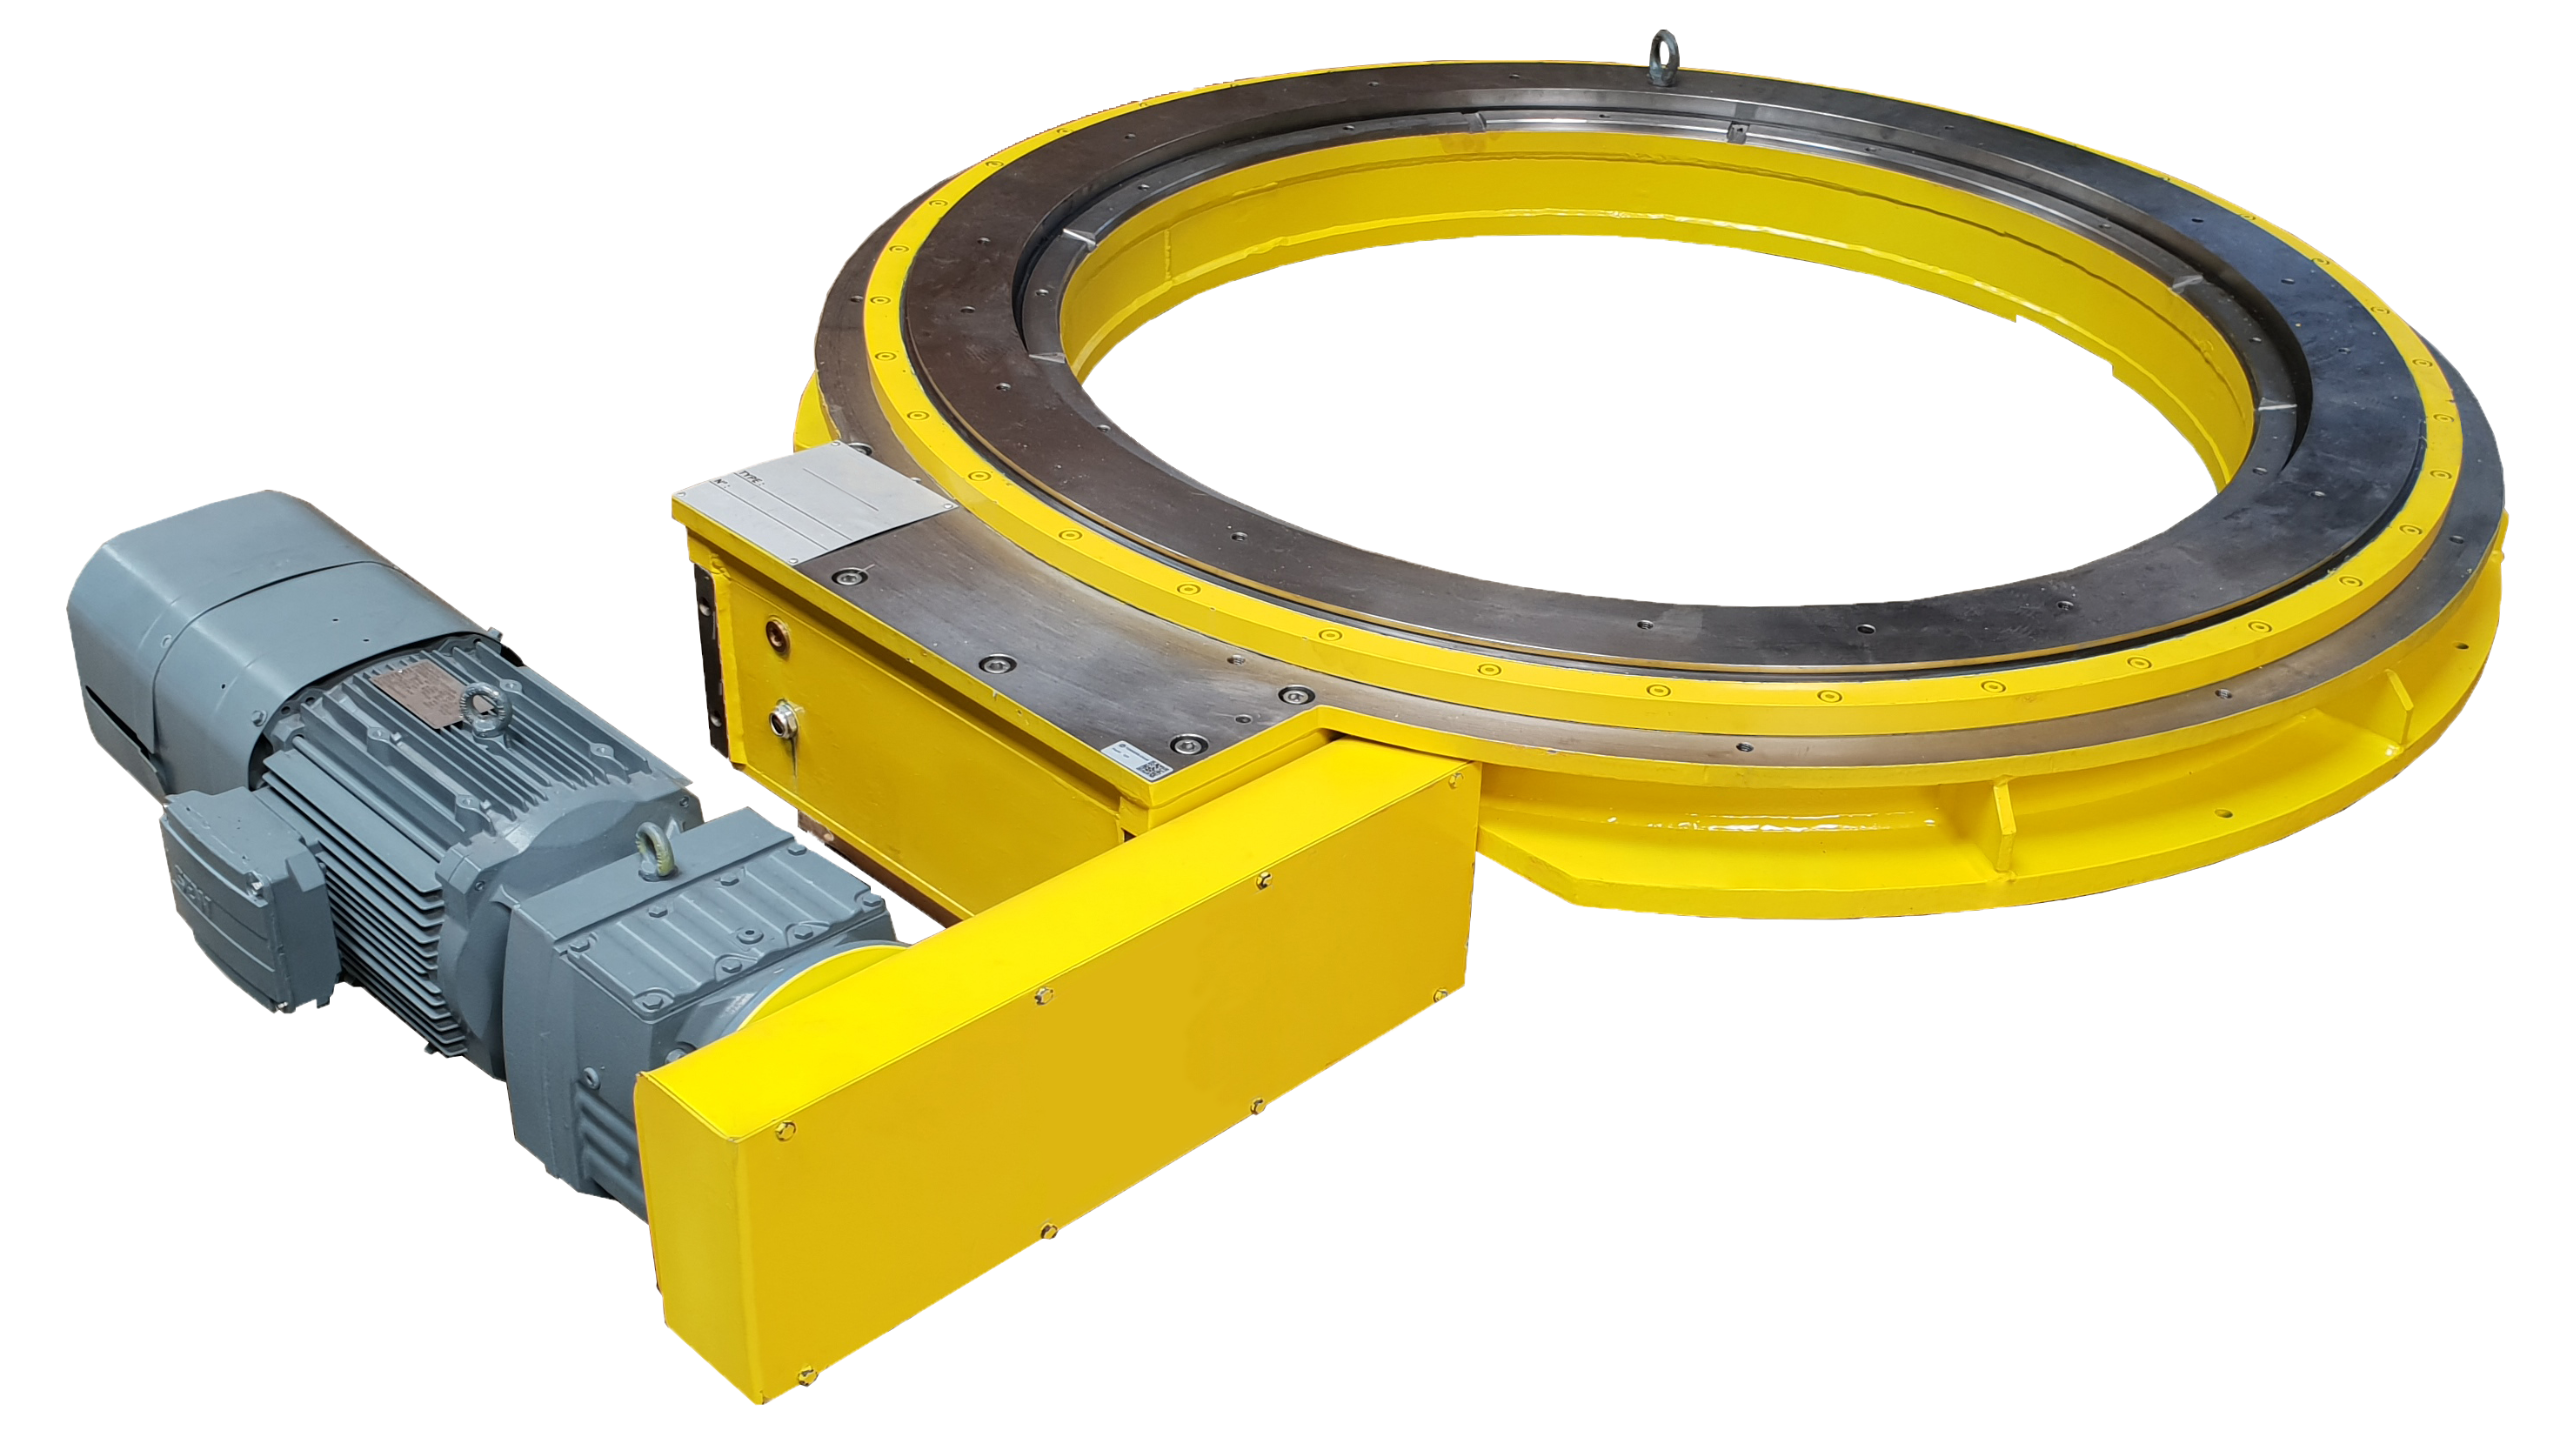 EGC Ring Rotary Table